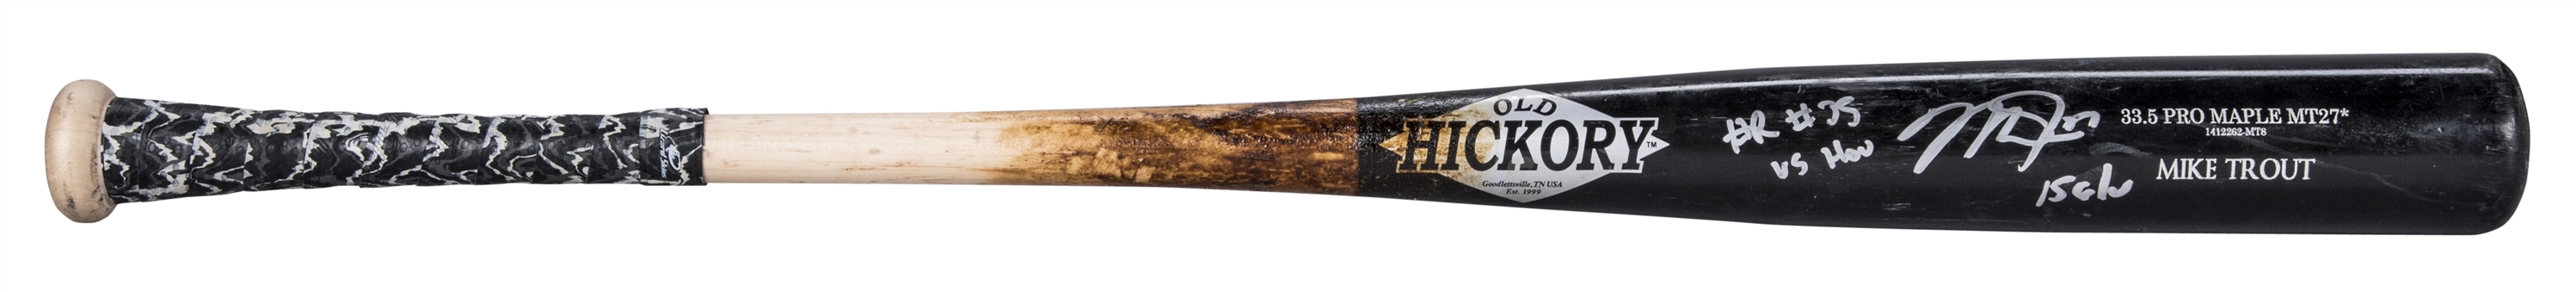 2015 Mike Trout Game Used and Signed Old Hickory 33.5 PRO MAPLE MT27 Model Bat Used For Home Run #35 Vs. Houston on 9/13/15 (PSA/DNA GU 10 & Anderson LOA)